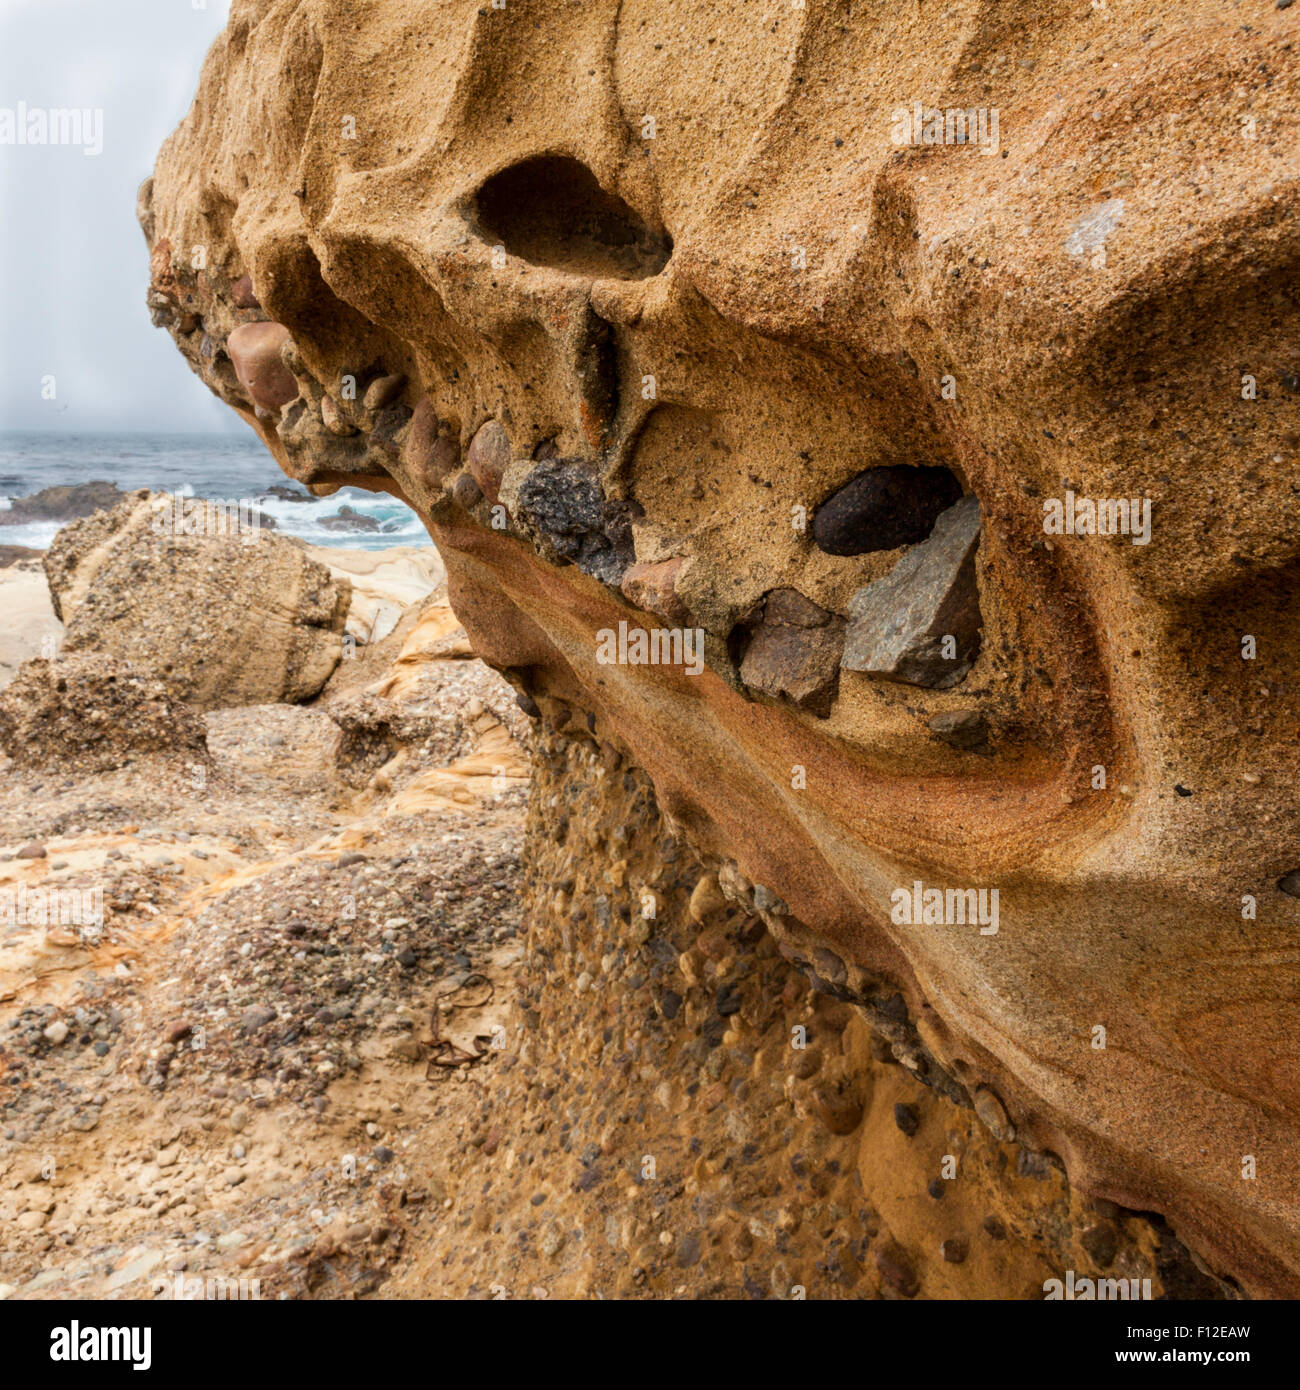 Eroded sandstone conglomerate on the beach at Point Lobos State Natural Reserve near Carmel, California Stock Photo